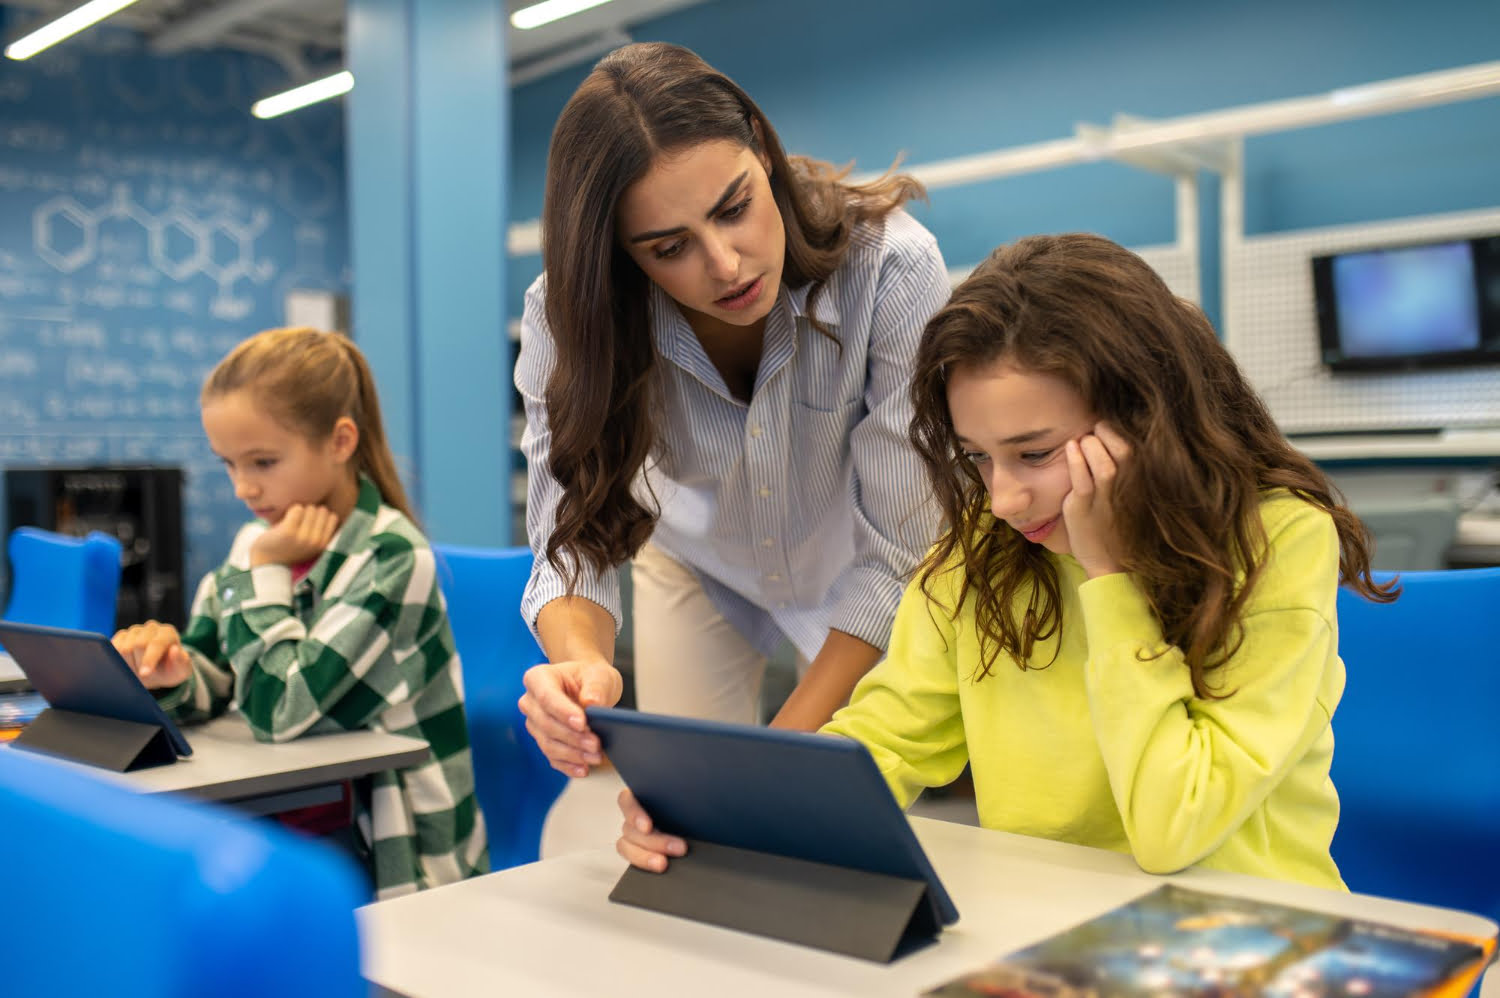 How Can Technology Enhance the Learning Experience for Students?